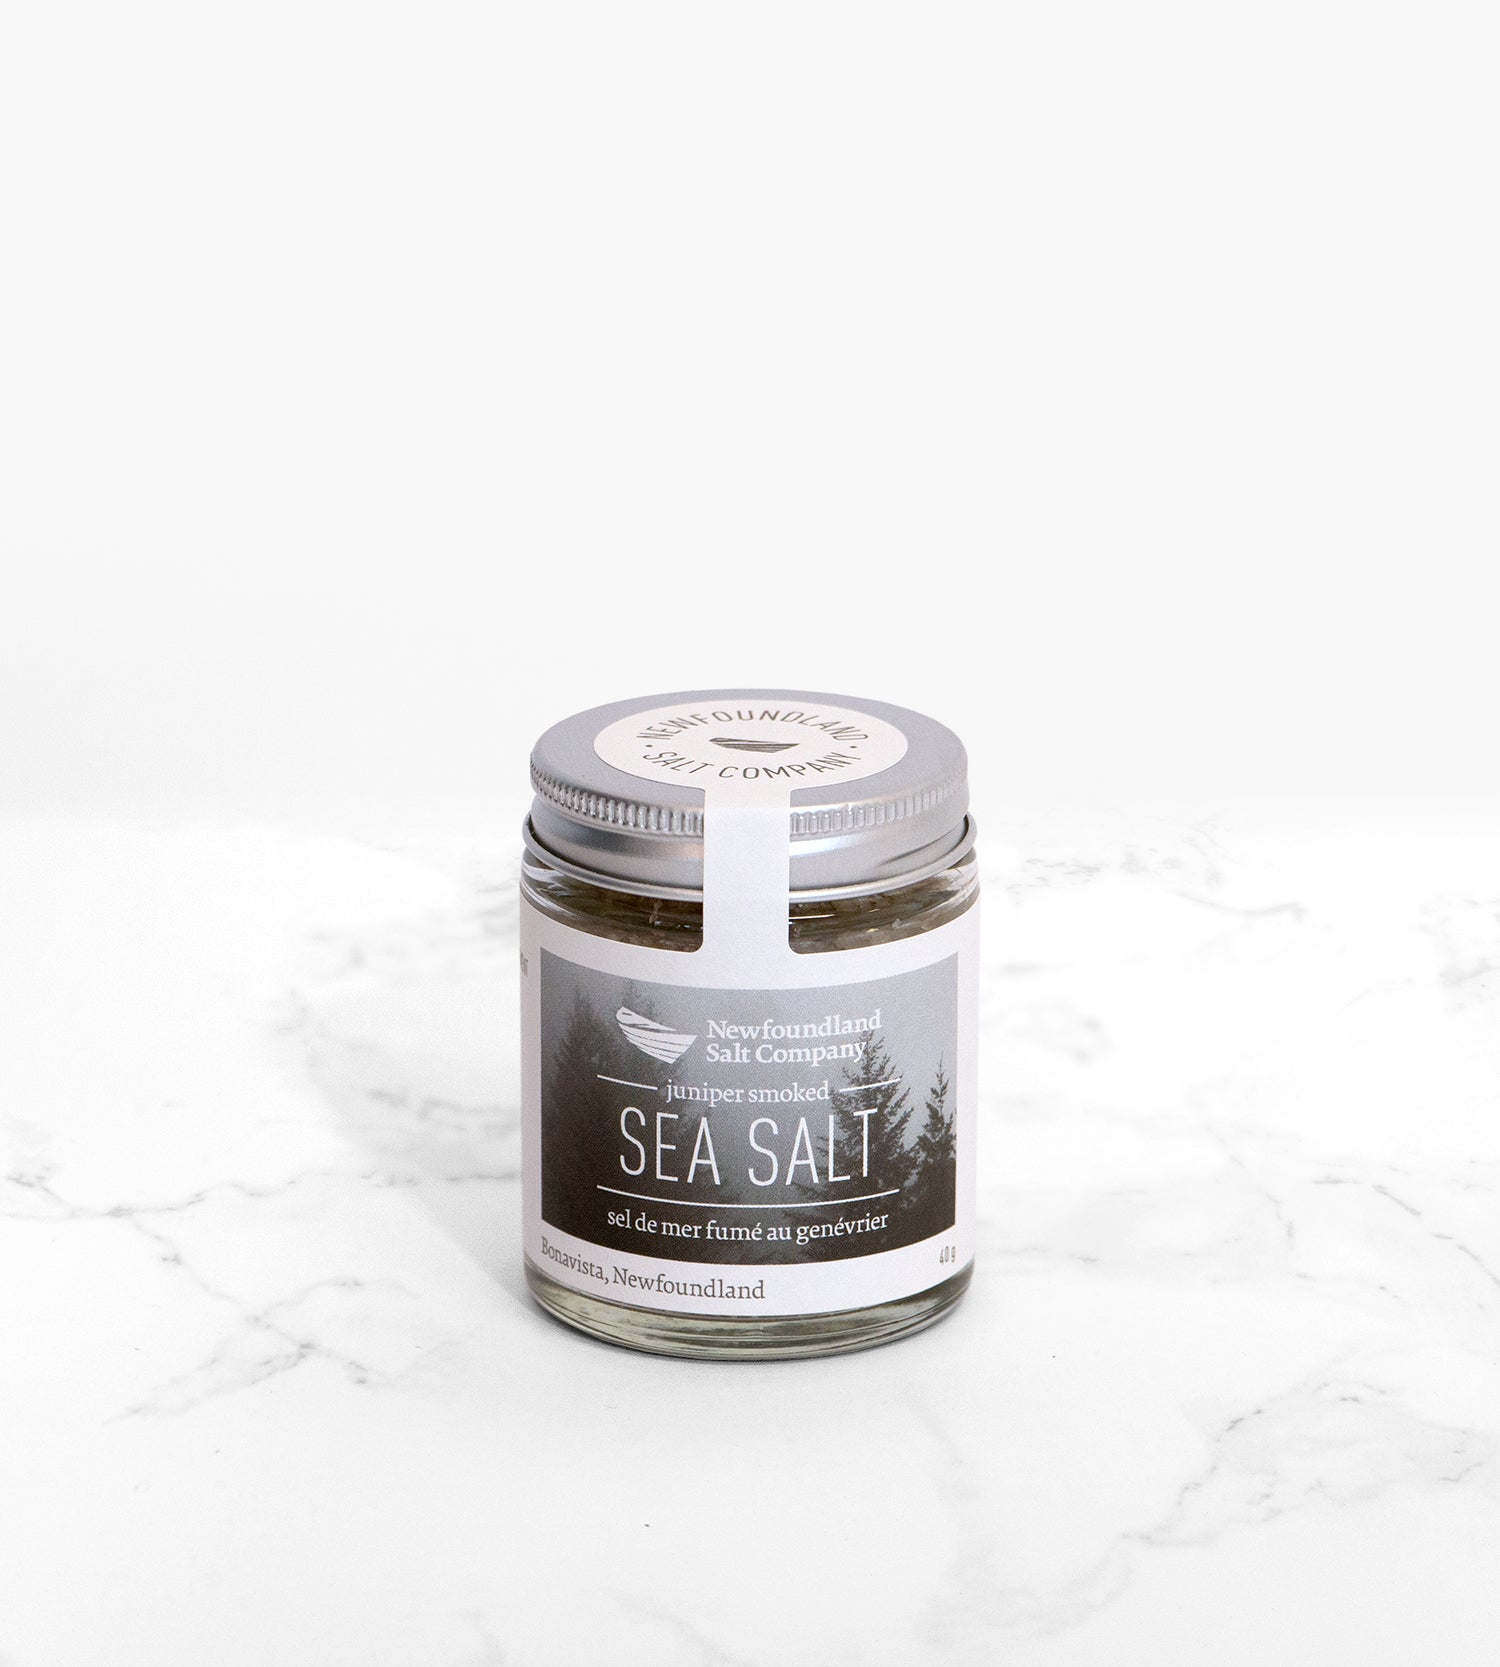 A glass jar of juniper-smoked sea salt on a white marble surface. The label on the jar depicts a foggy conifer forest.